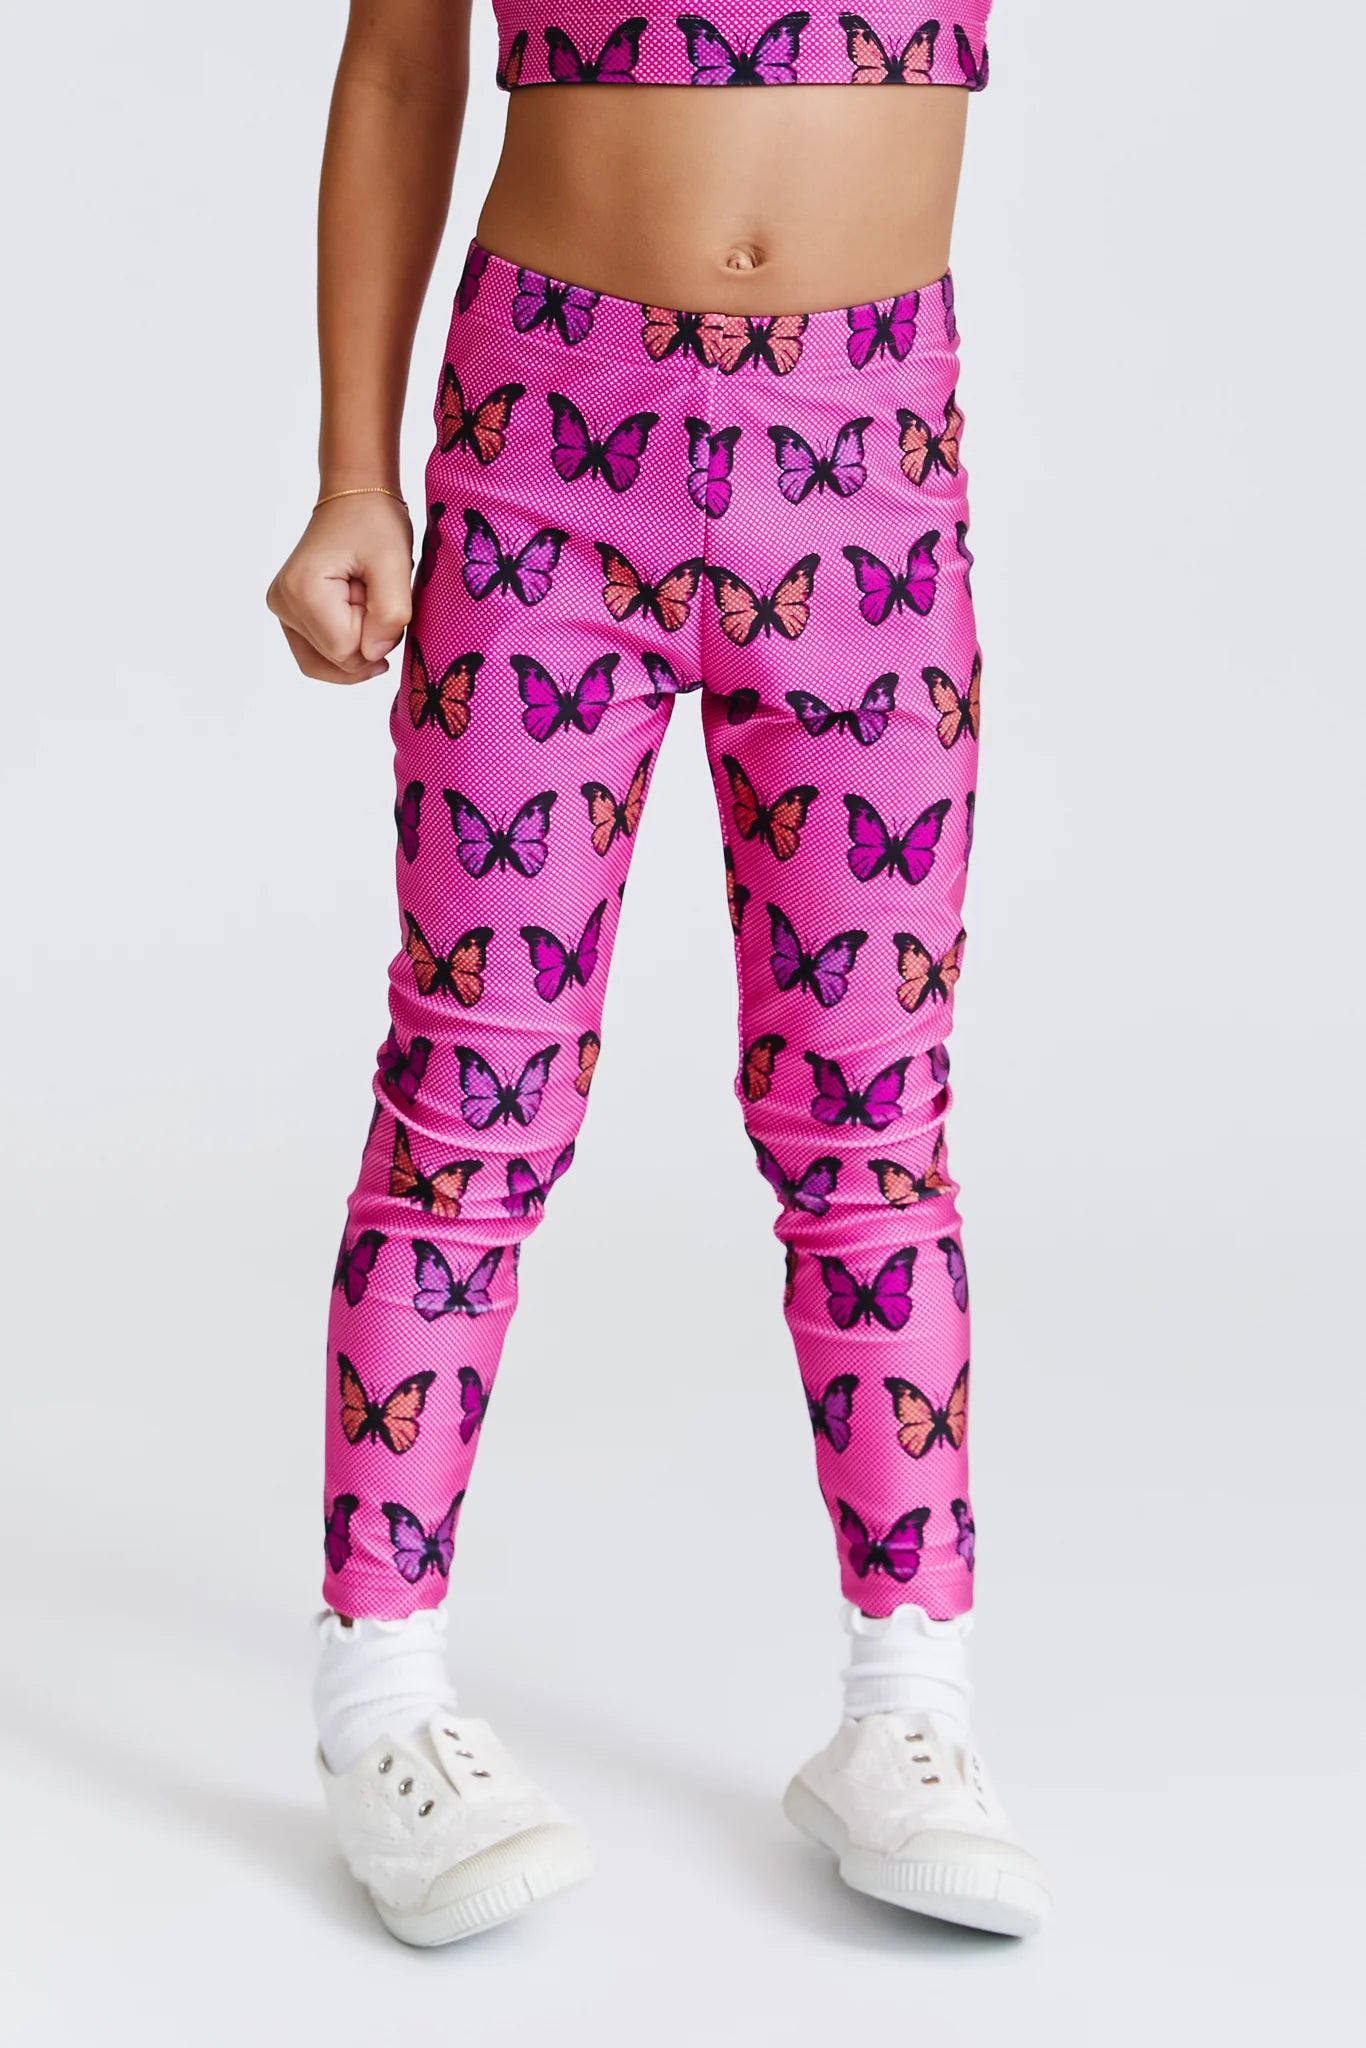 Pink Halftone Butterfly Leggings – Charlotte West Baby